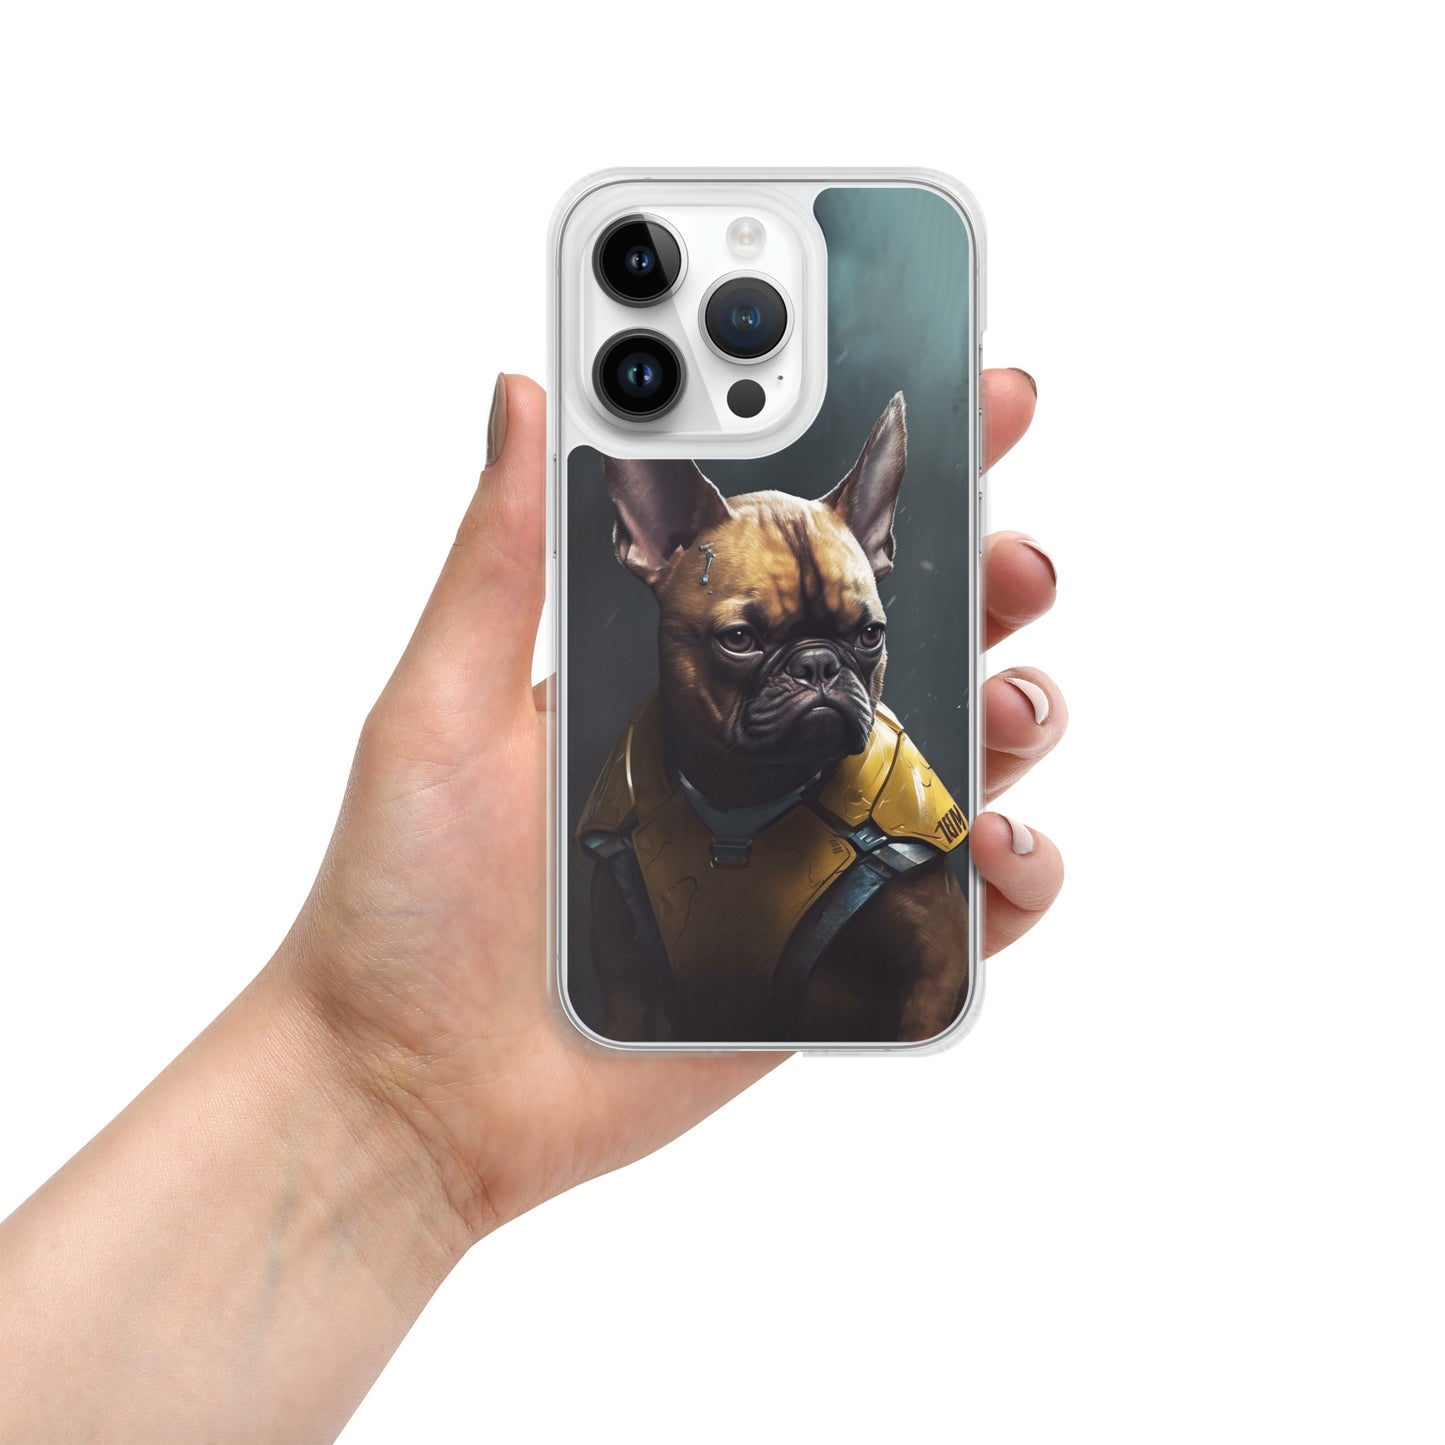 Chic Frenchie Illustrated iPhone Case - Ideal Present for Canine Aficionados